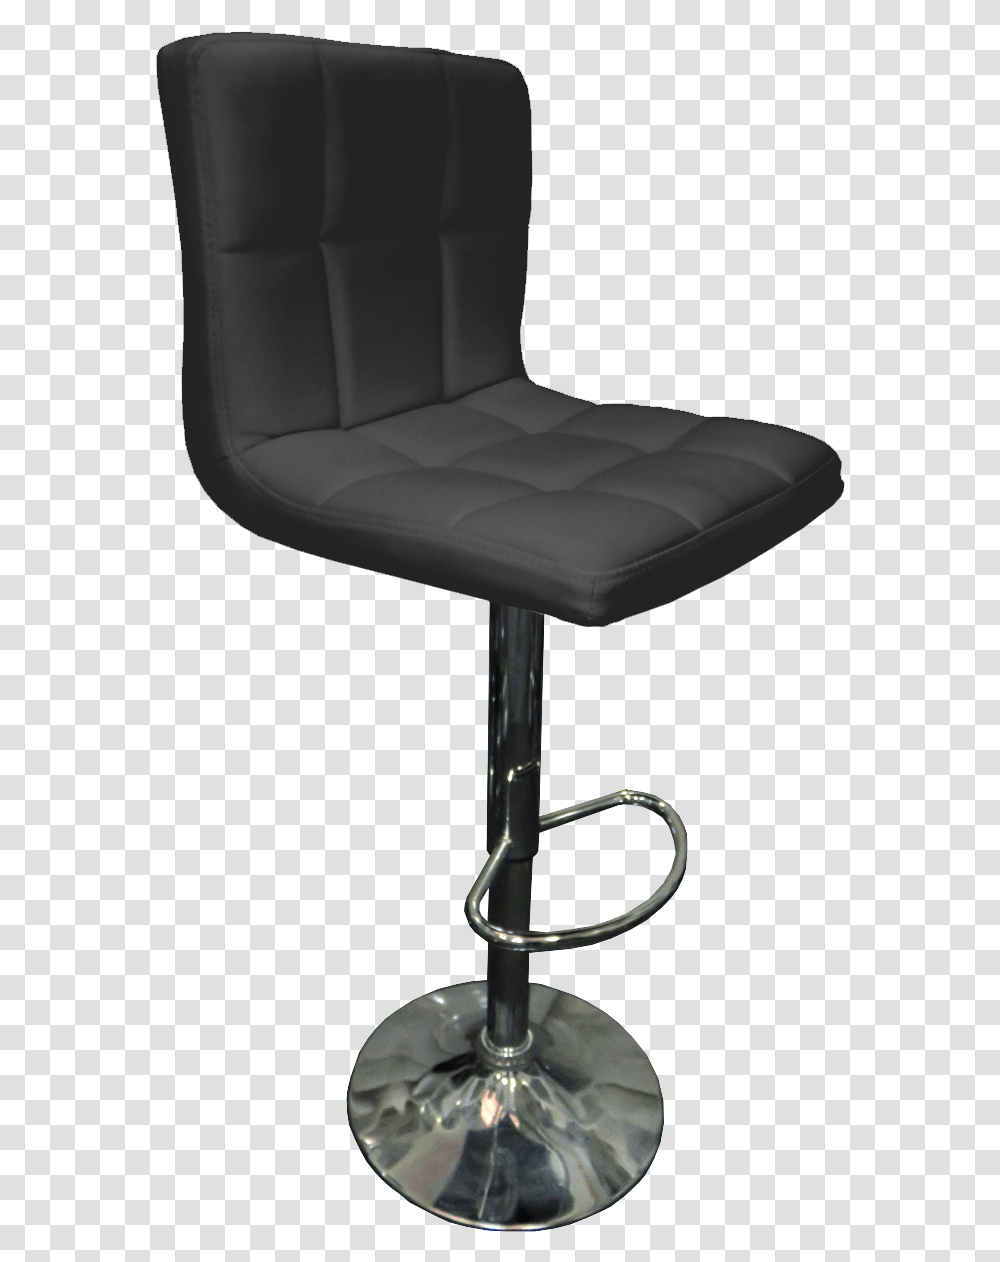 Seville Leather Bar Stool In Black Solid, Furniture, Chair, Lamp Transparent Png